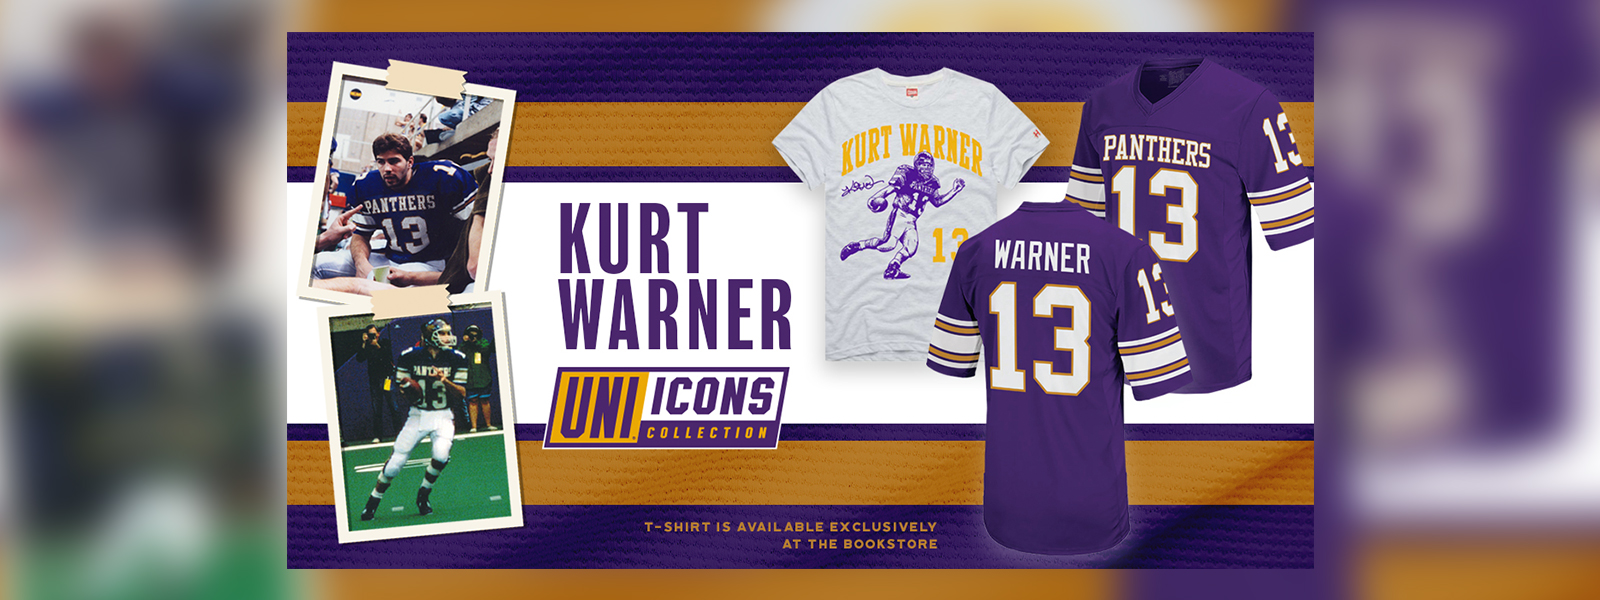 Kurt Warner - UNI Icons collection. T-Shirt available exclusively at bookstore